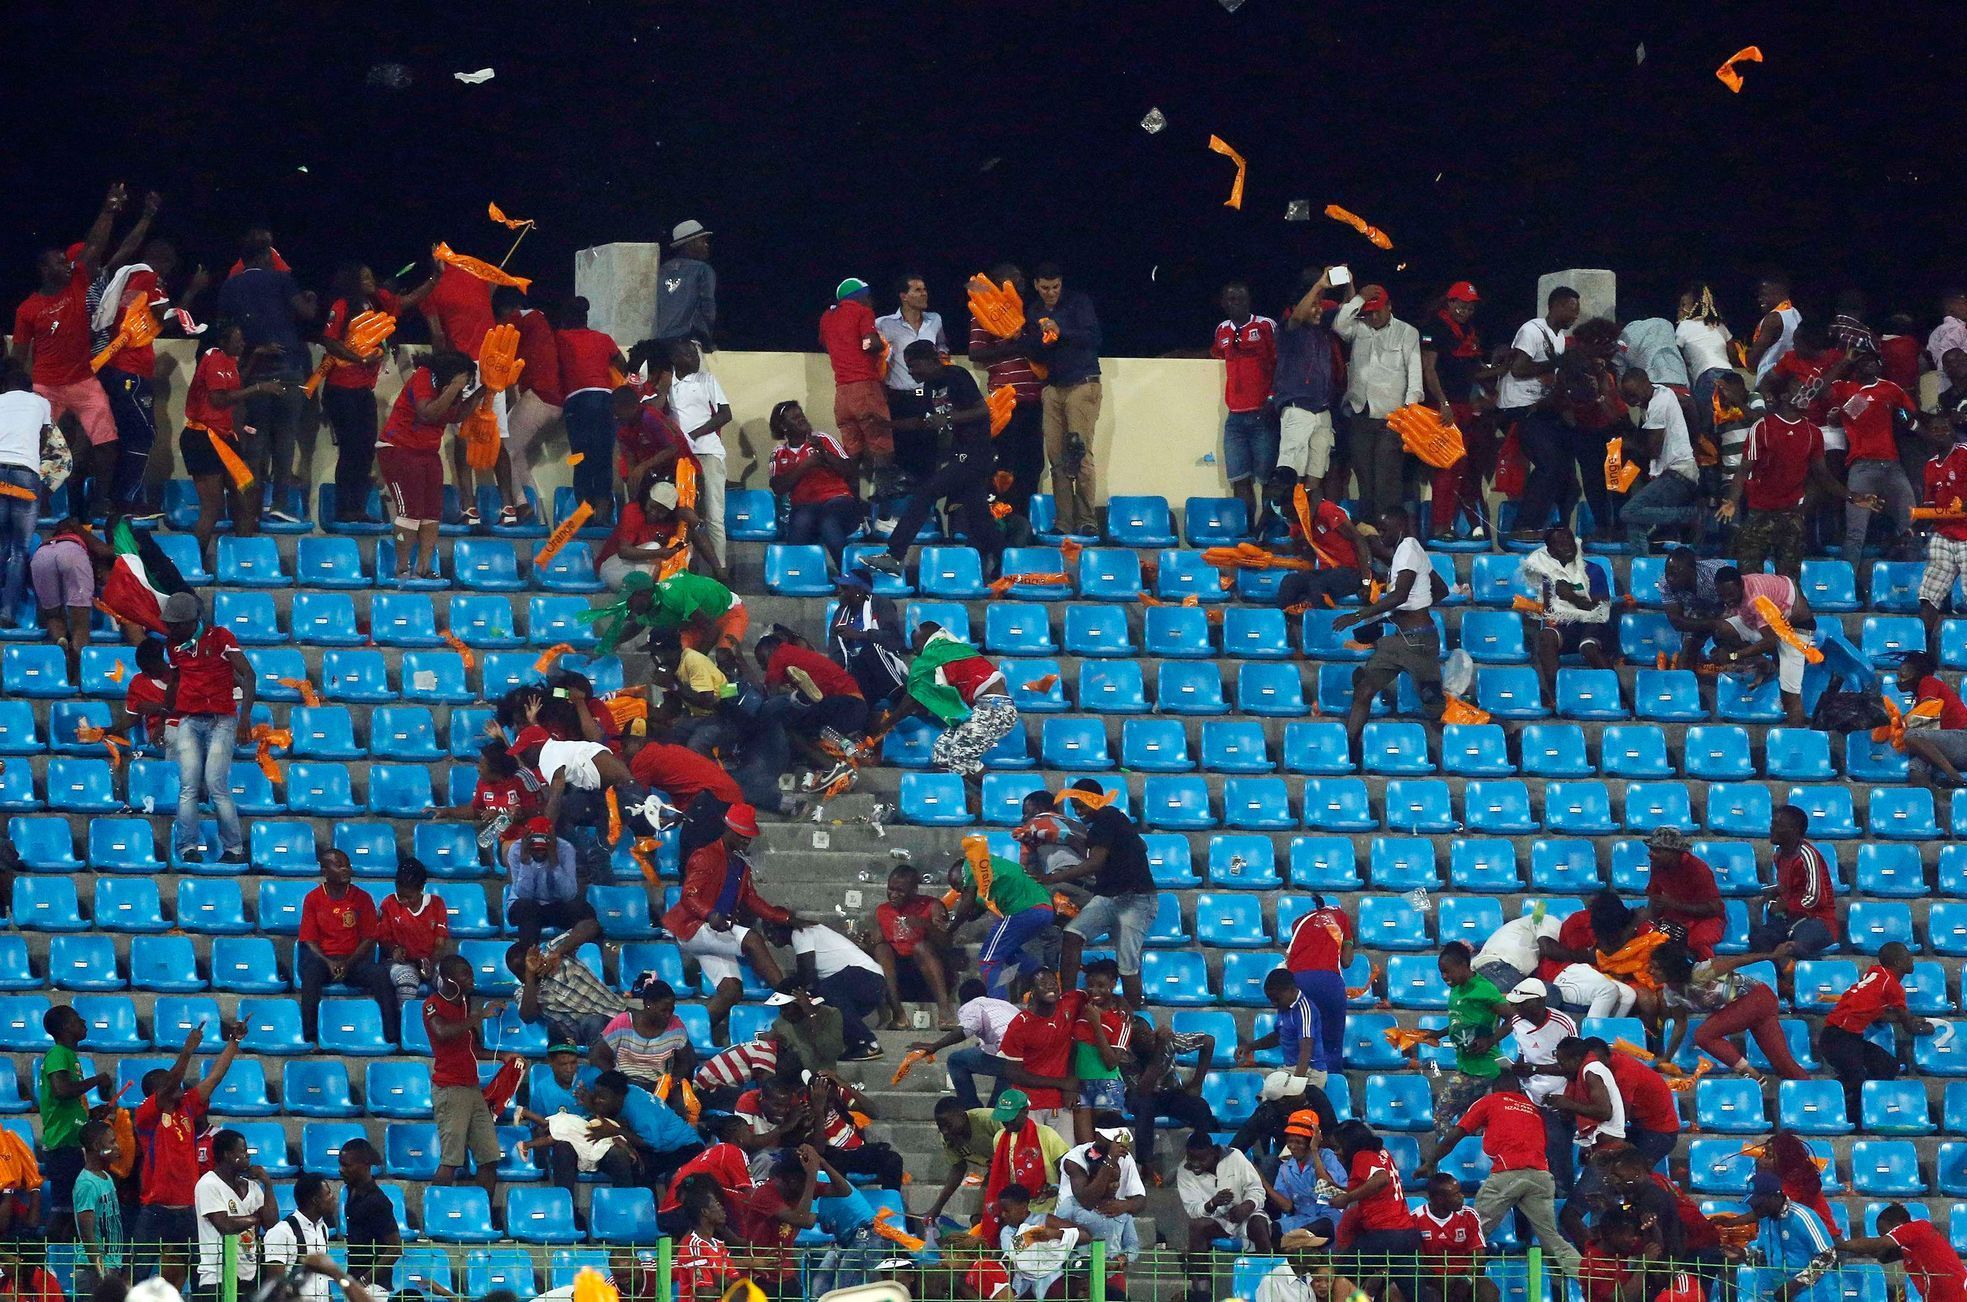 Equitorial Guinea fans react as a police helicopter hovers above the stand during the African Cup semi-final match against Ghana in Malabo